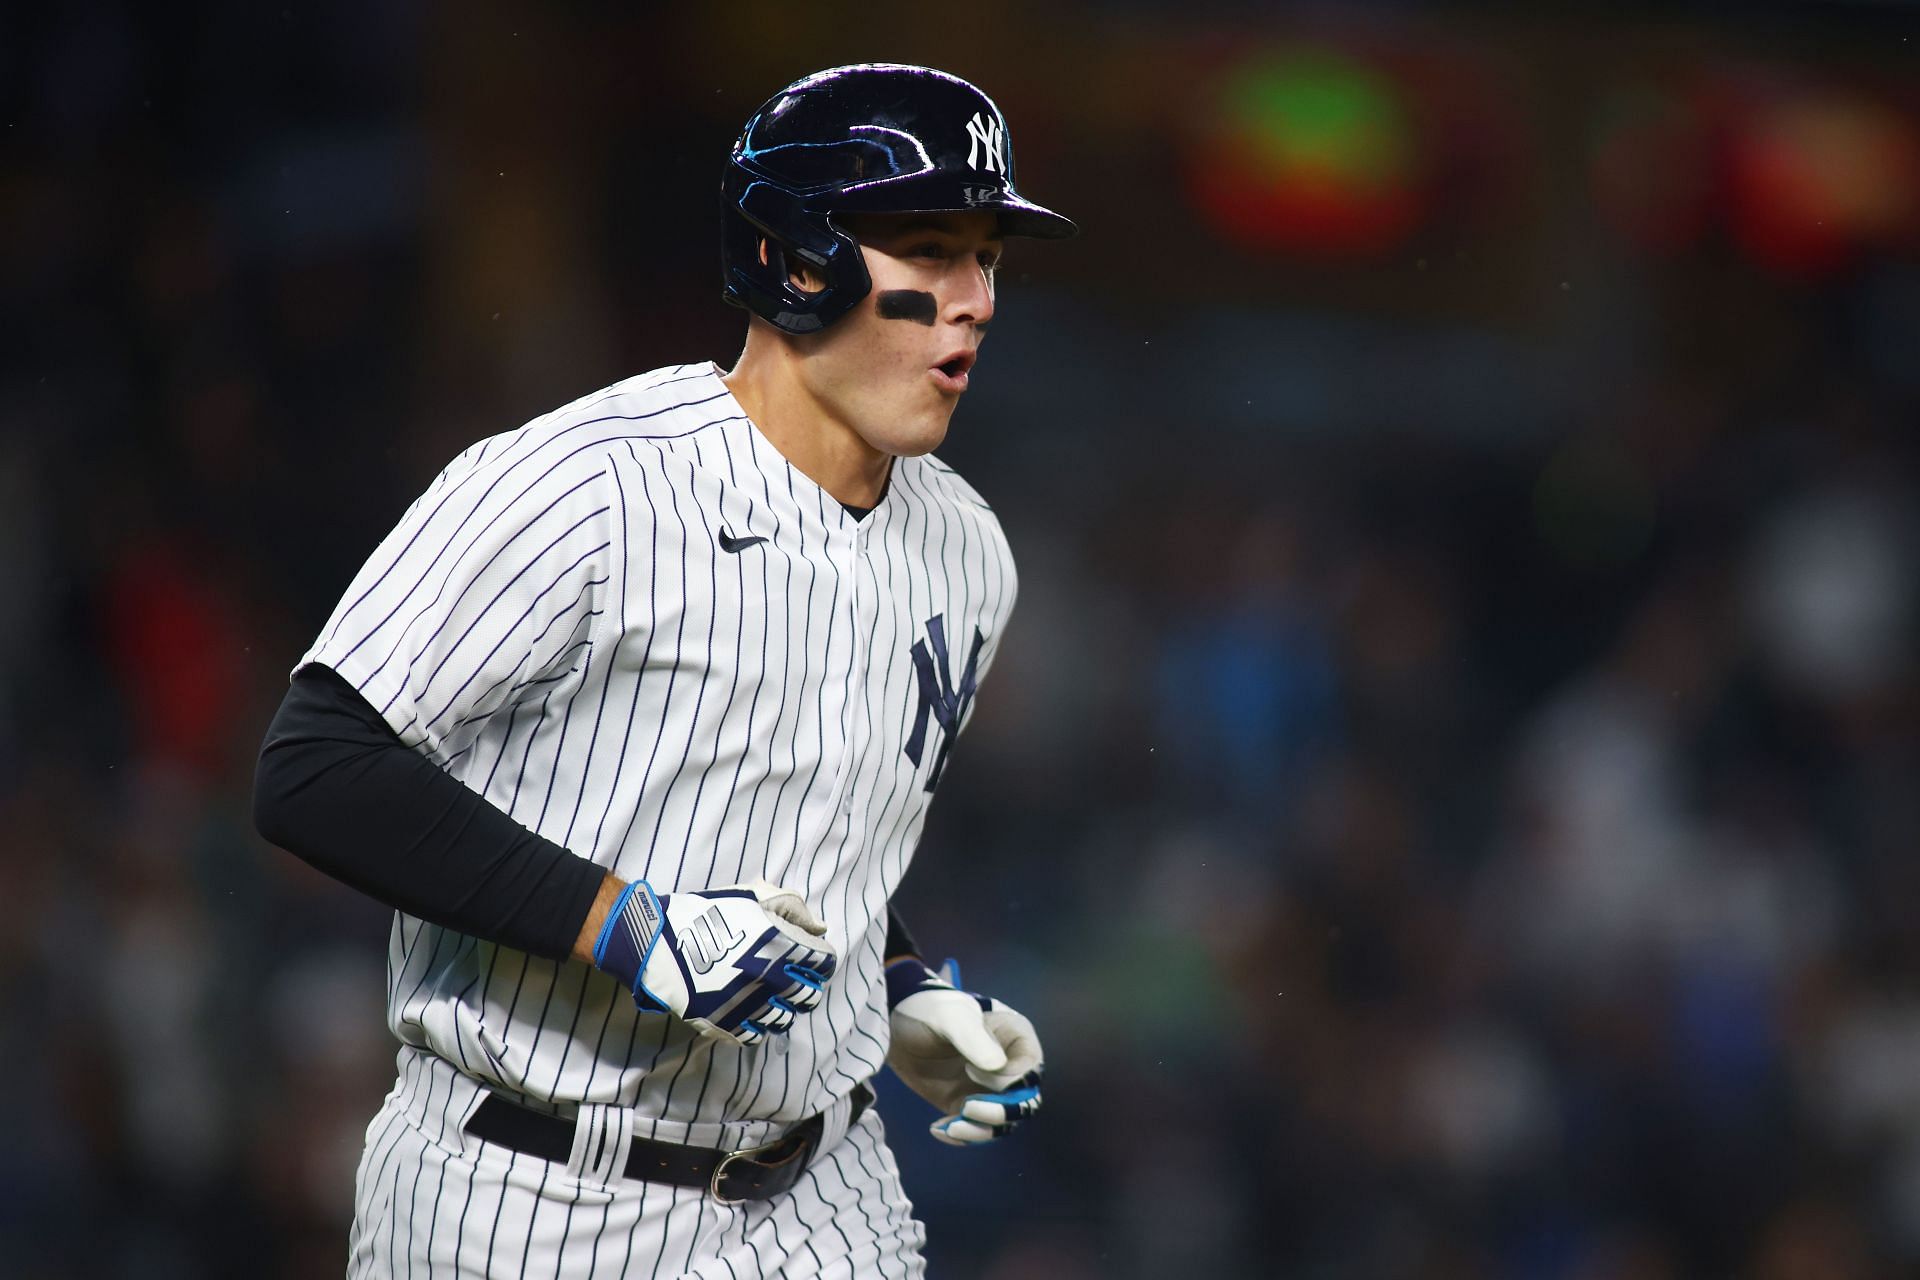 Anthony Rizzo has found his new home in the Bronx.